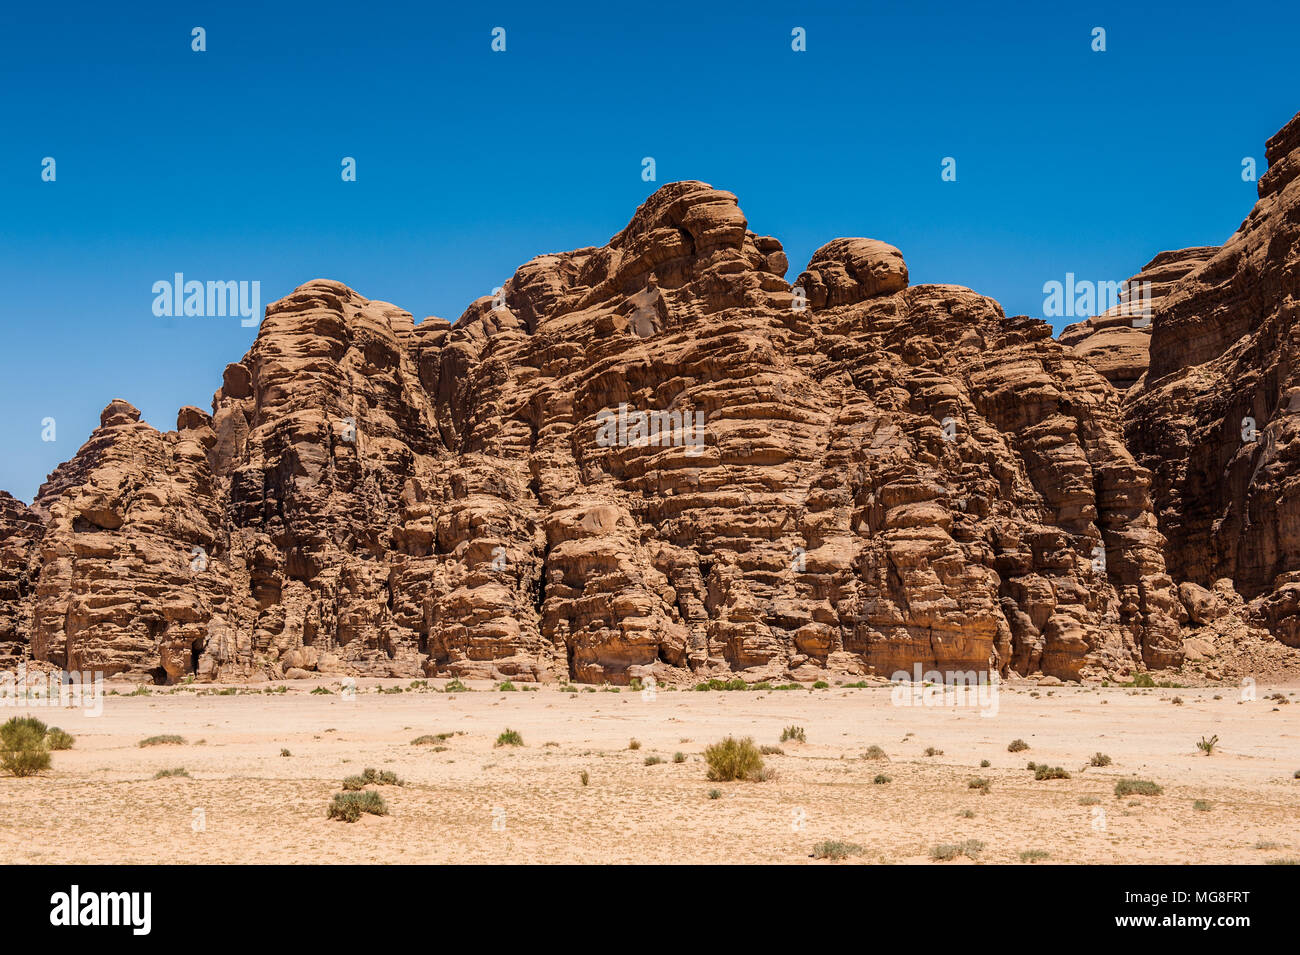 Desert of the Wadi Rum, The Valley of the Moon, southern Jordan Stock Photo  - Alamy